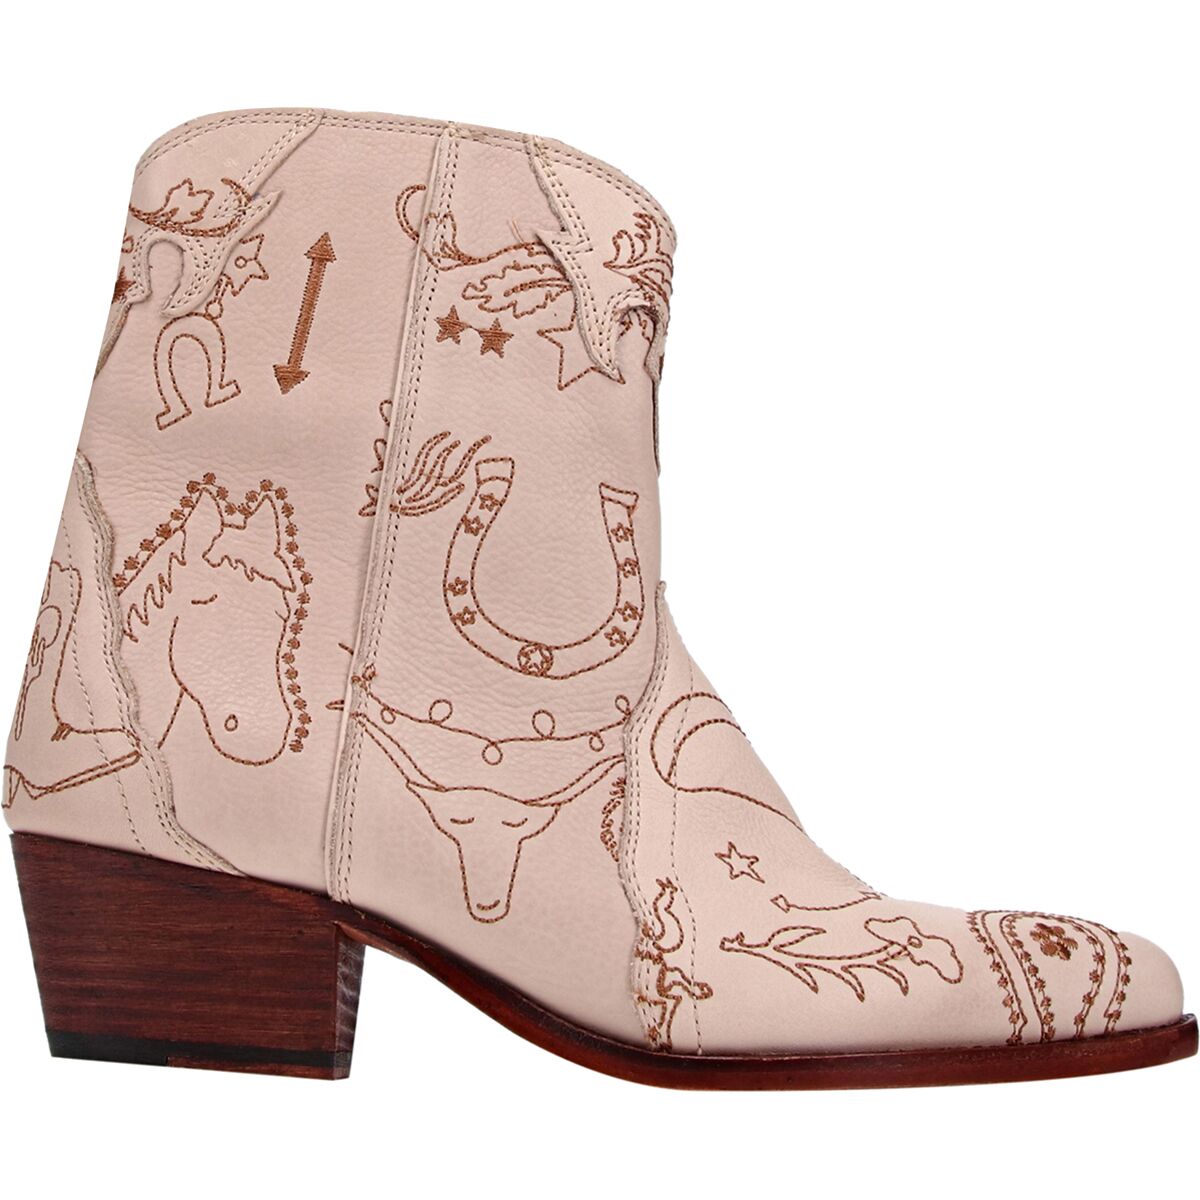 Cowboy Boots Are No Longer Just For Festival Season - theFashionSpot